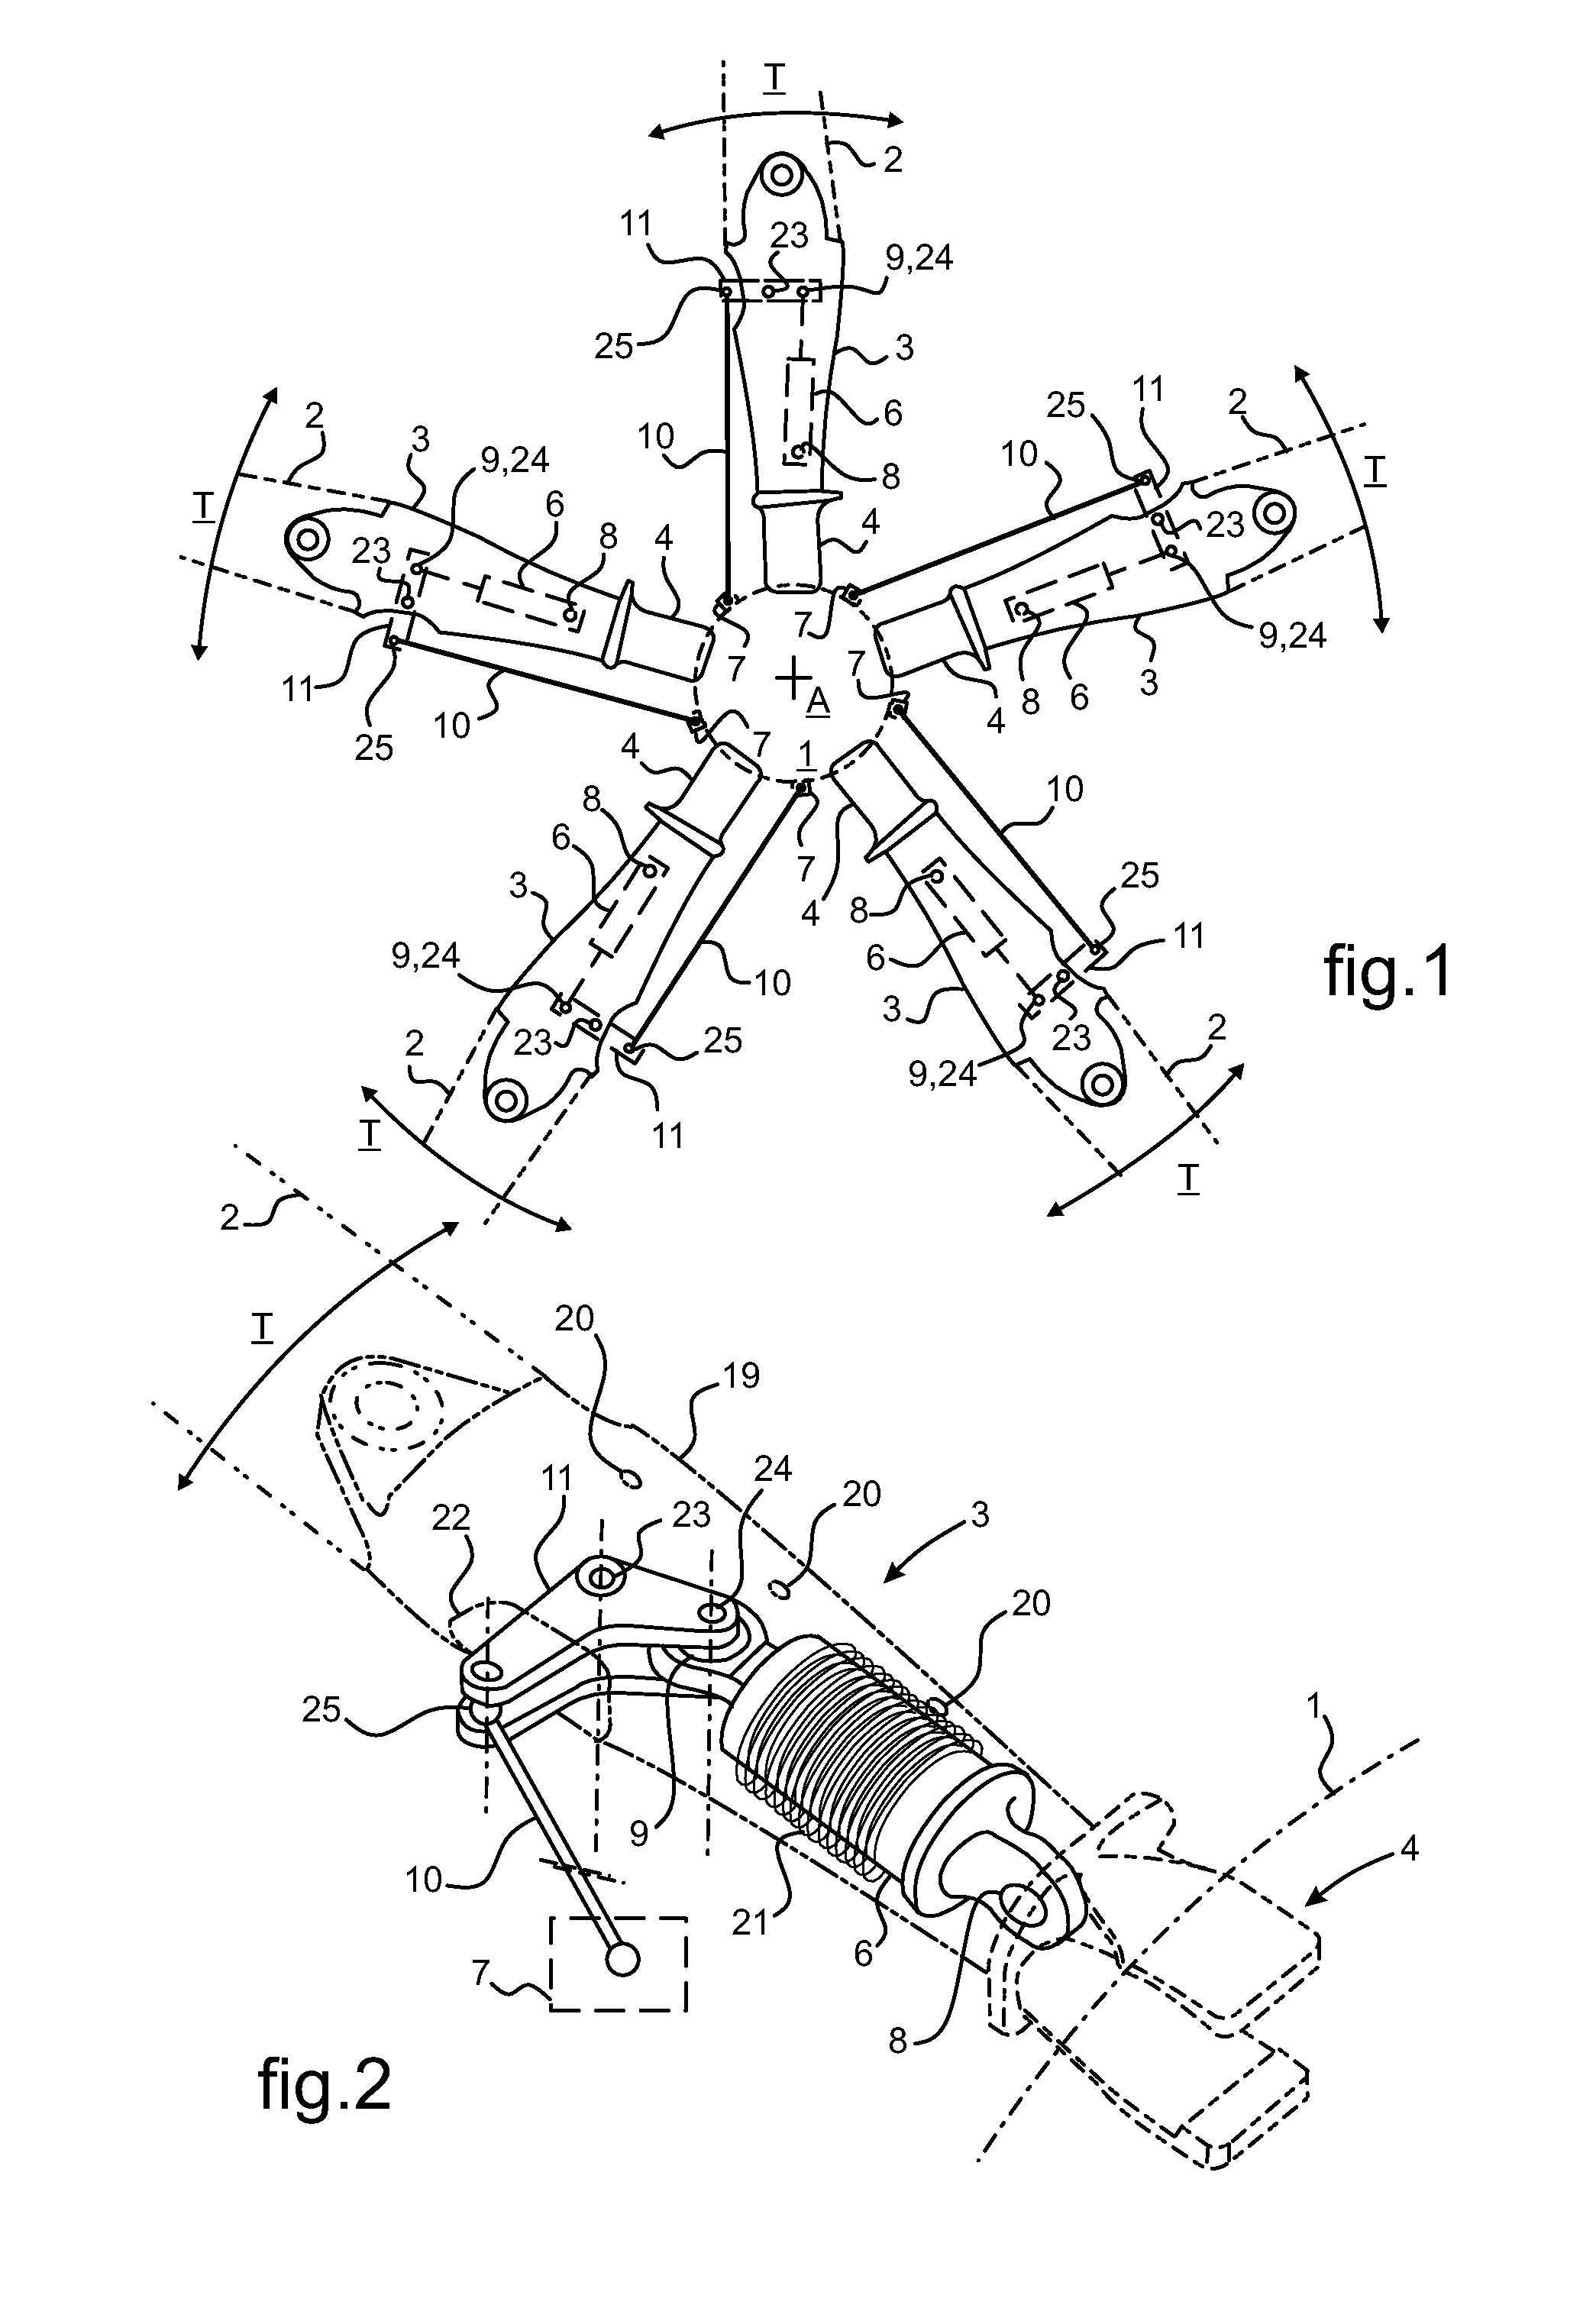 Rotorcraft rotor fitted with lead-lag dampers housed in sleeves connecting blades to a hub of the rotor